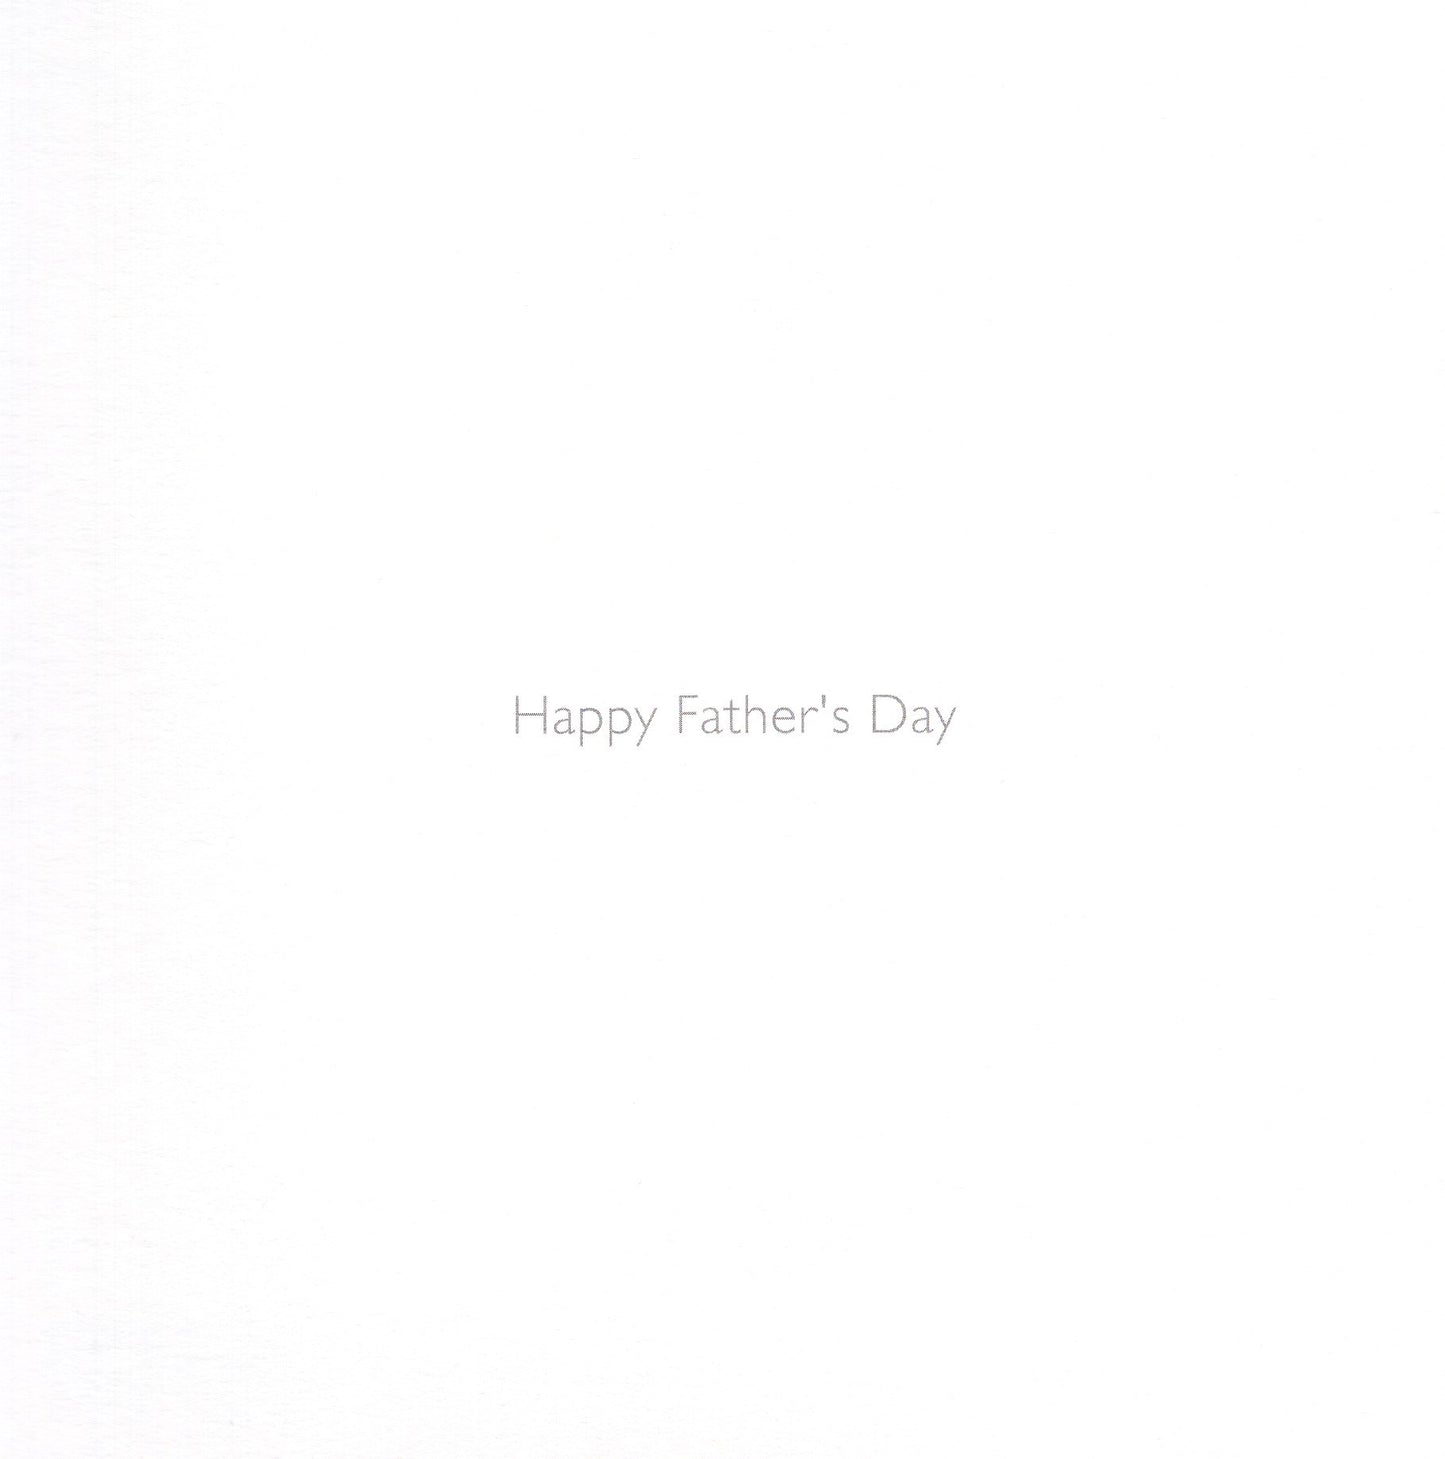 Have A Tea-rrific Happy Father's Day Greeting Card